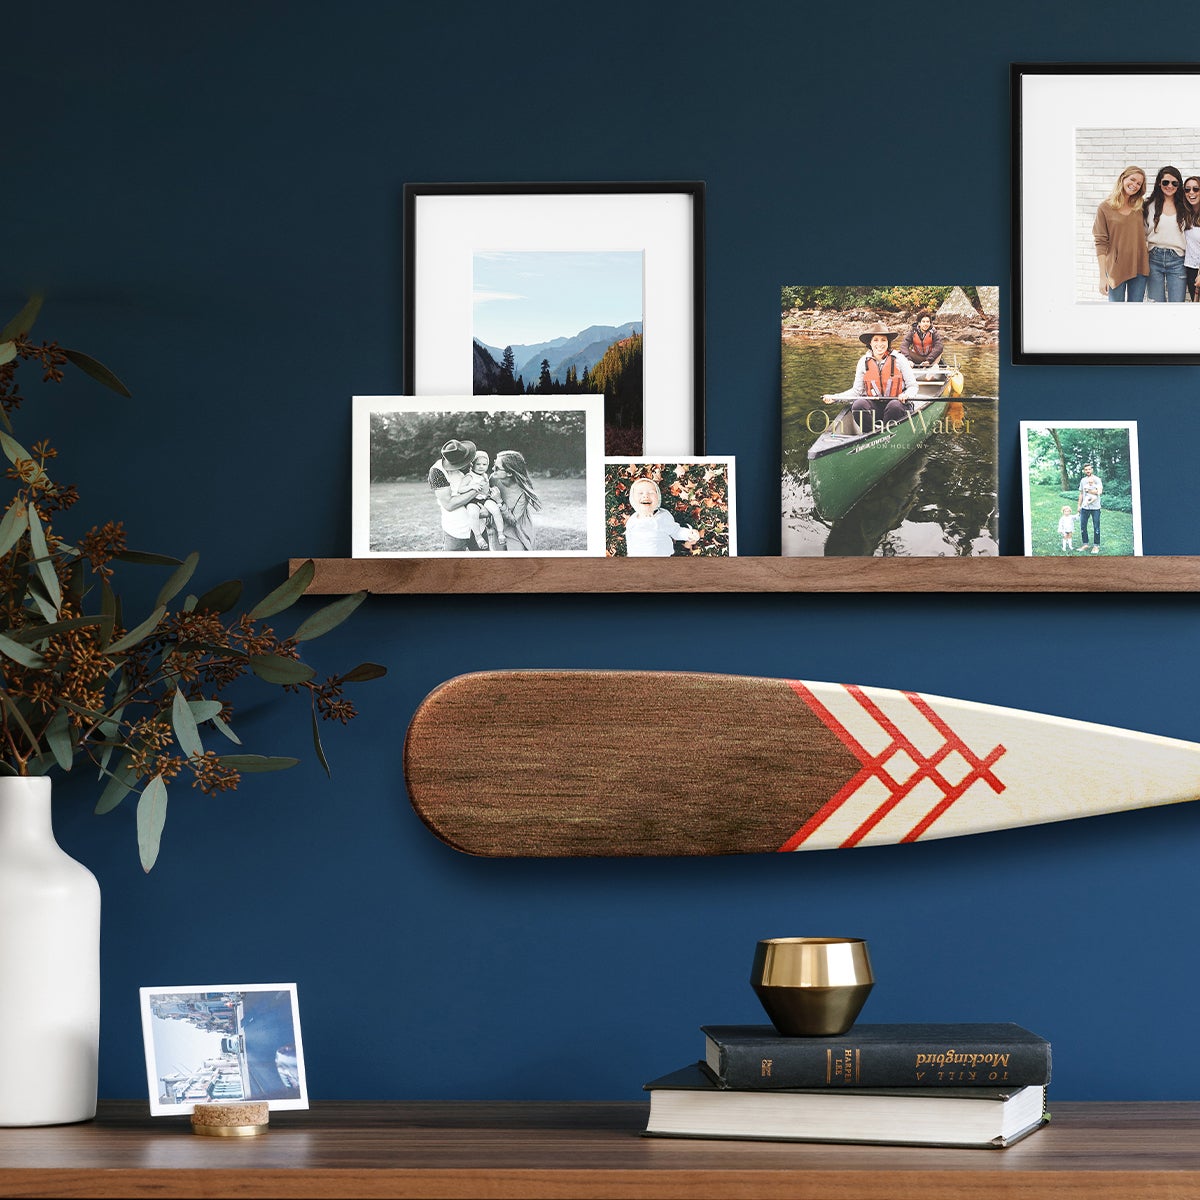 Artifact Uprising Metal Wooden Photo Ledge hung on royal blue wall and adorned with prints, frames, and photo books